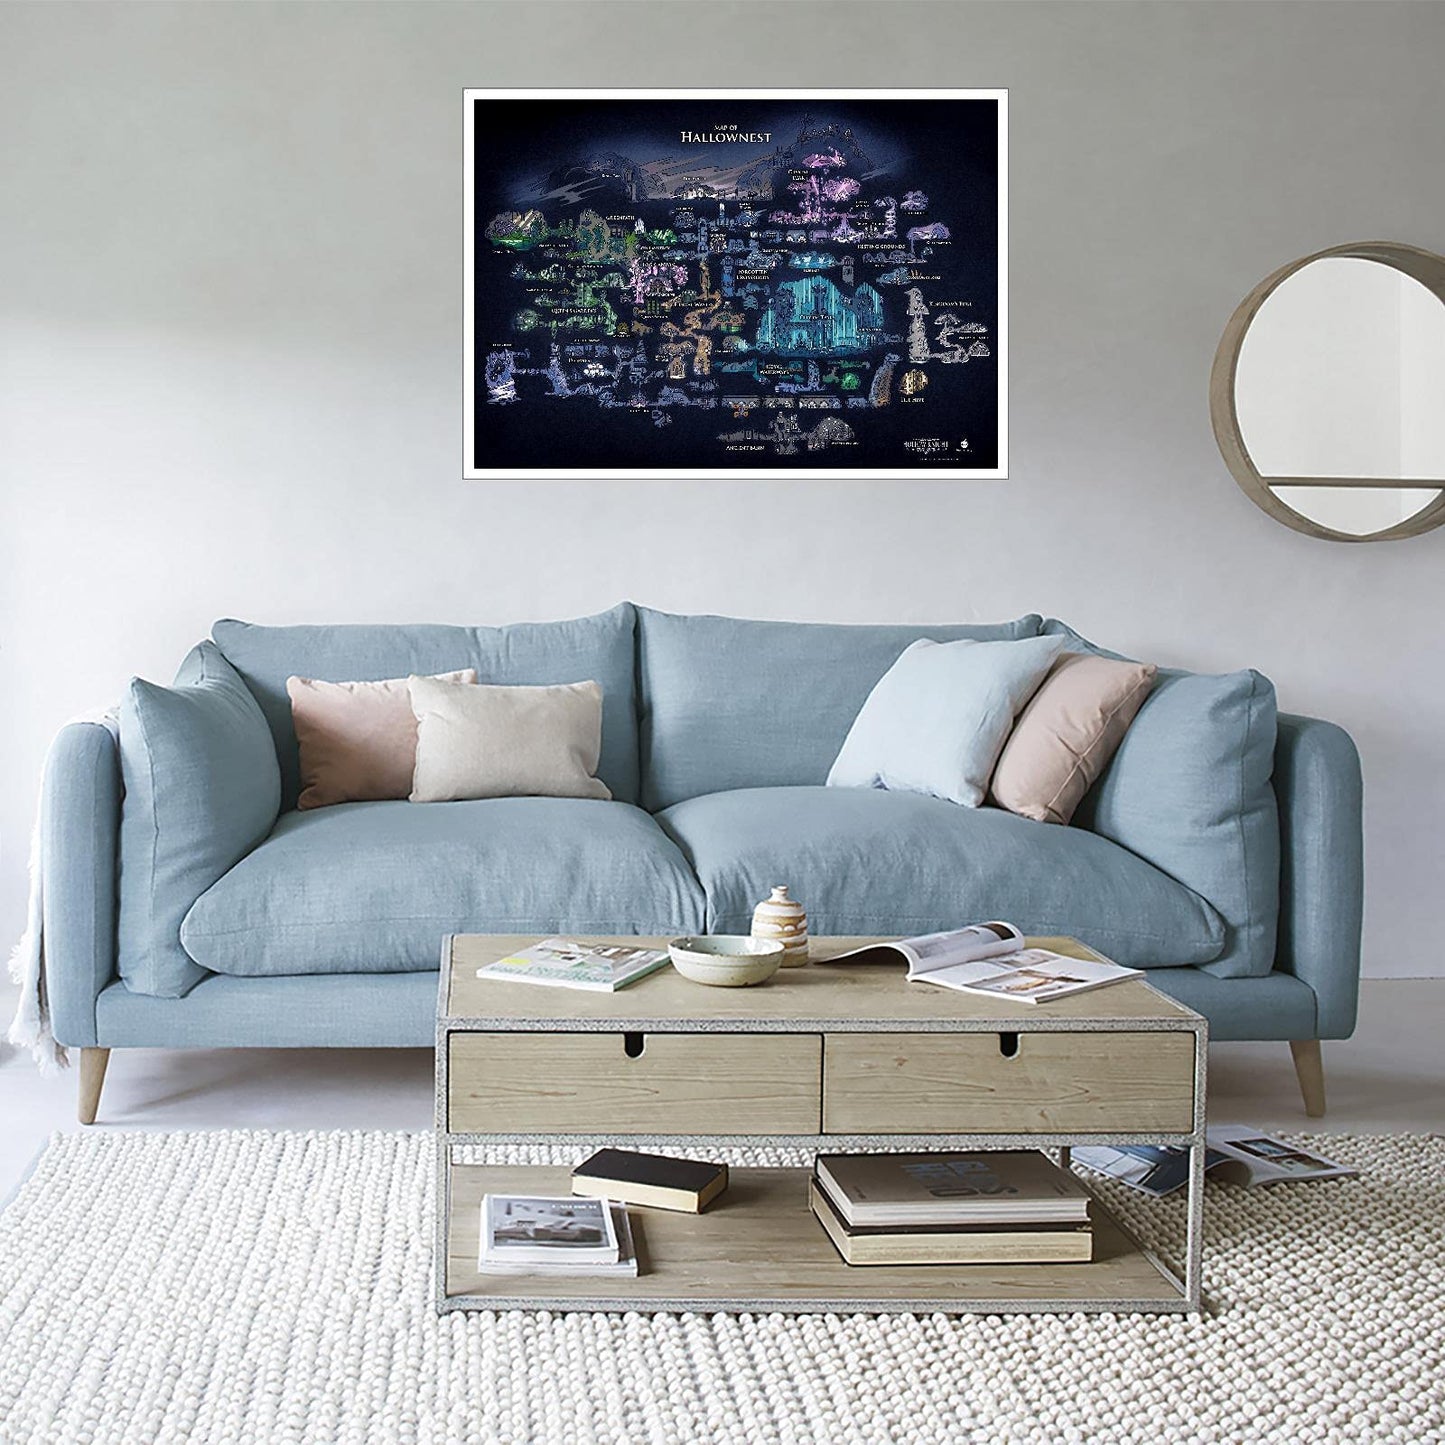 Hollownest T1175's Hollow Knight Map Poster Canvas Prints Wall Art For Home Office Decorations Unframed 18"x12"